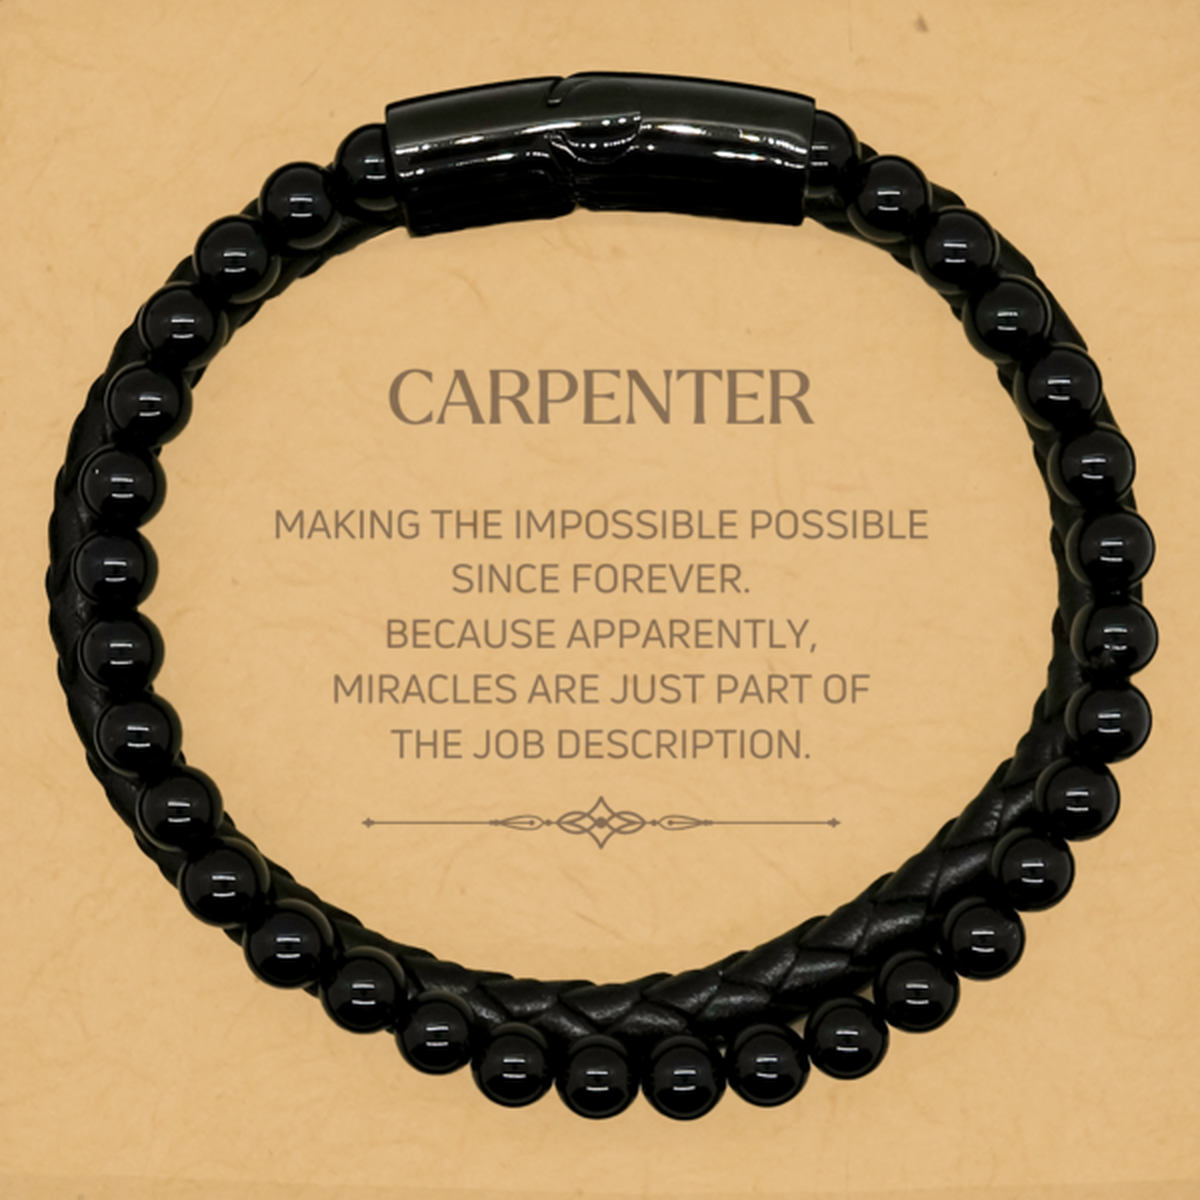 Funny Carpenter Gifts, Miracles are just part of the job description, Inspirational Birthday Stone Leather Bracelets For Carpenter, Men, Women, Coworkers, Friends, Boss